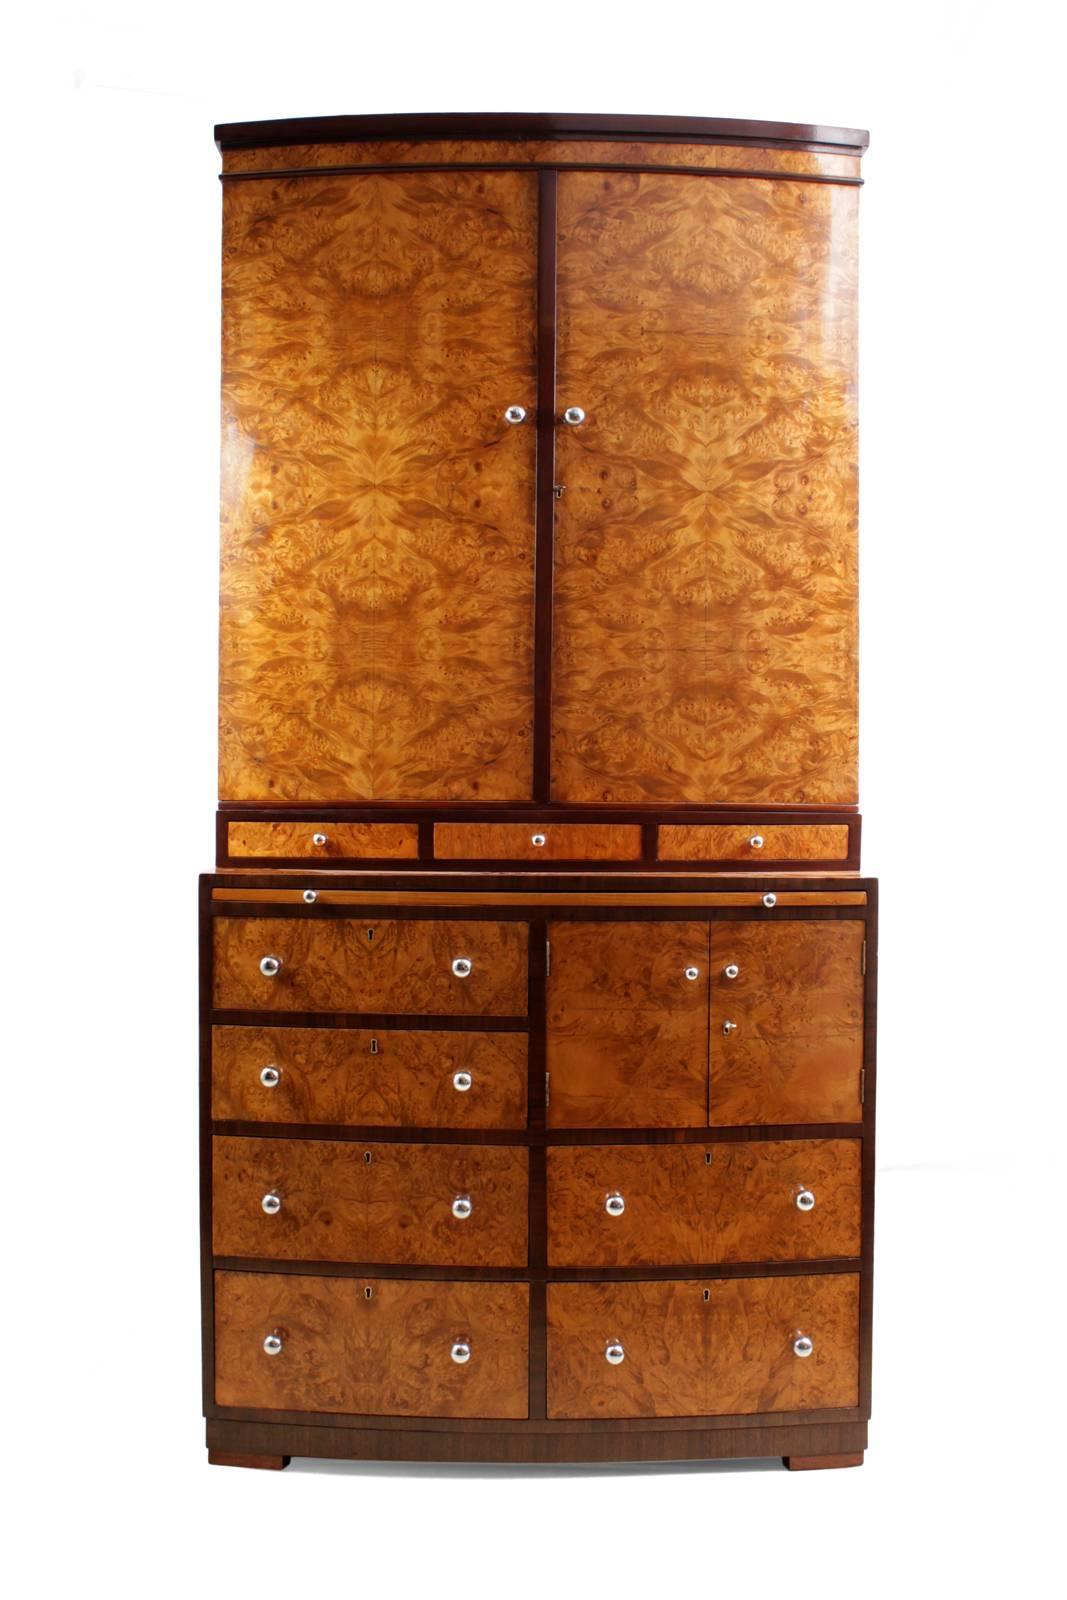 Early 20th Century Art Deco Cabinet with Bookcase and Drawers in Burr Maple